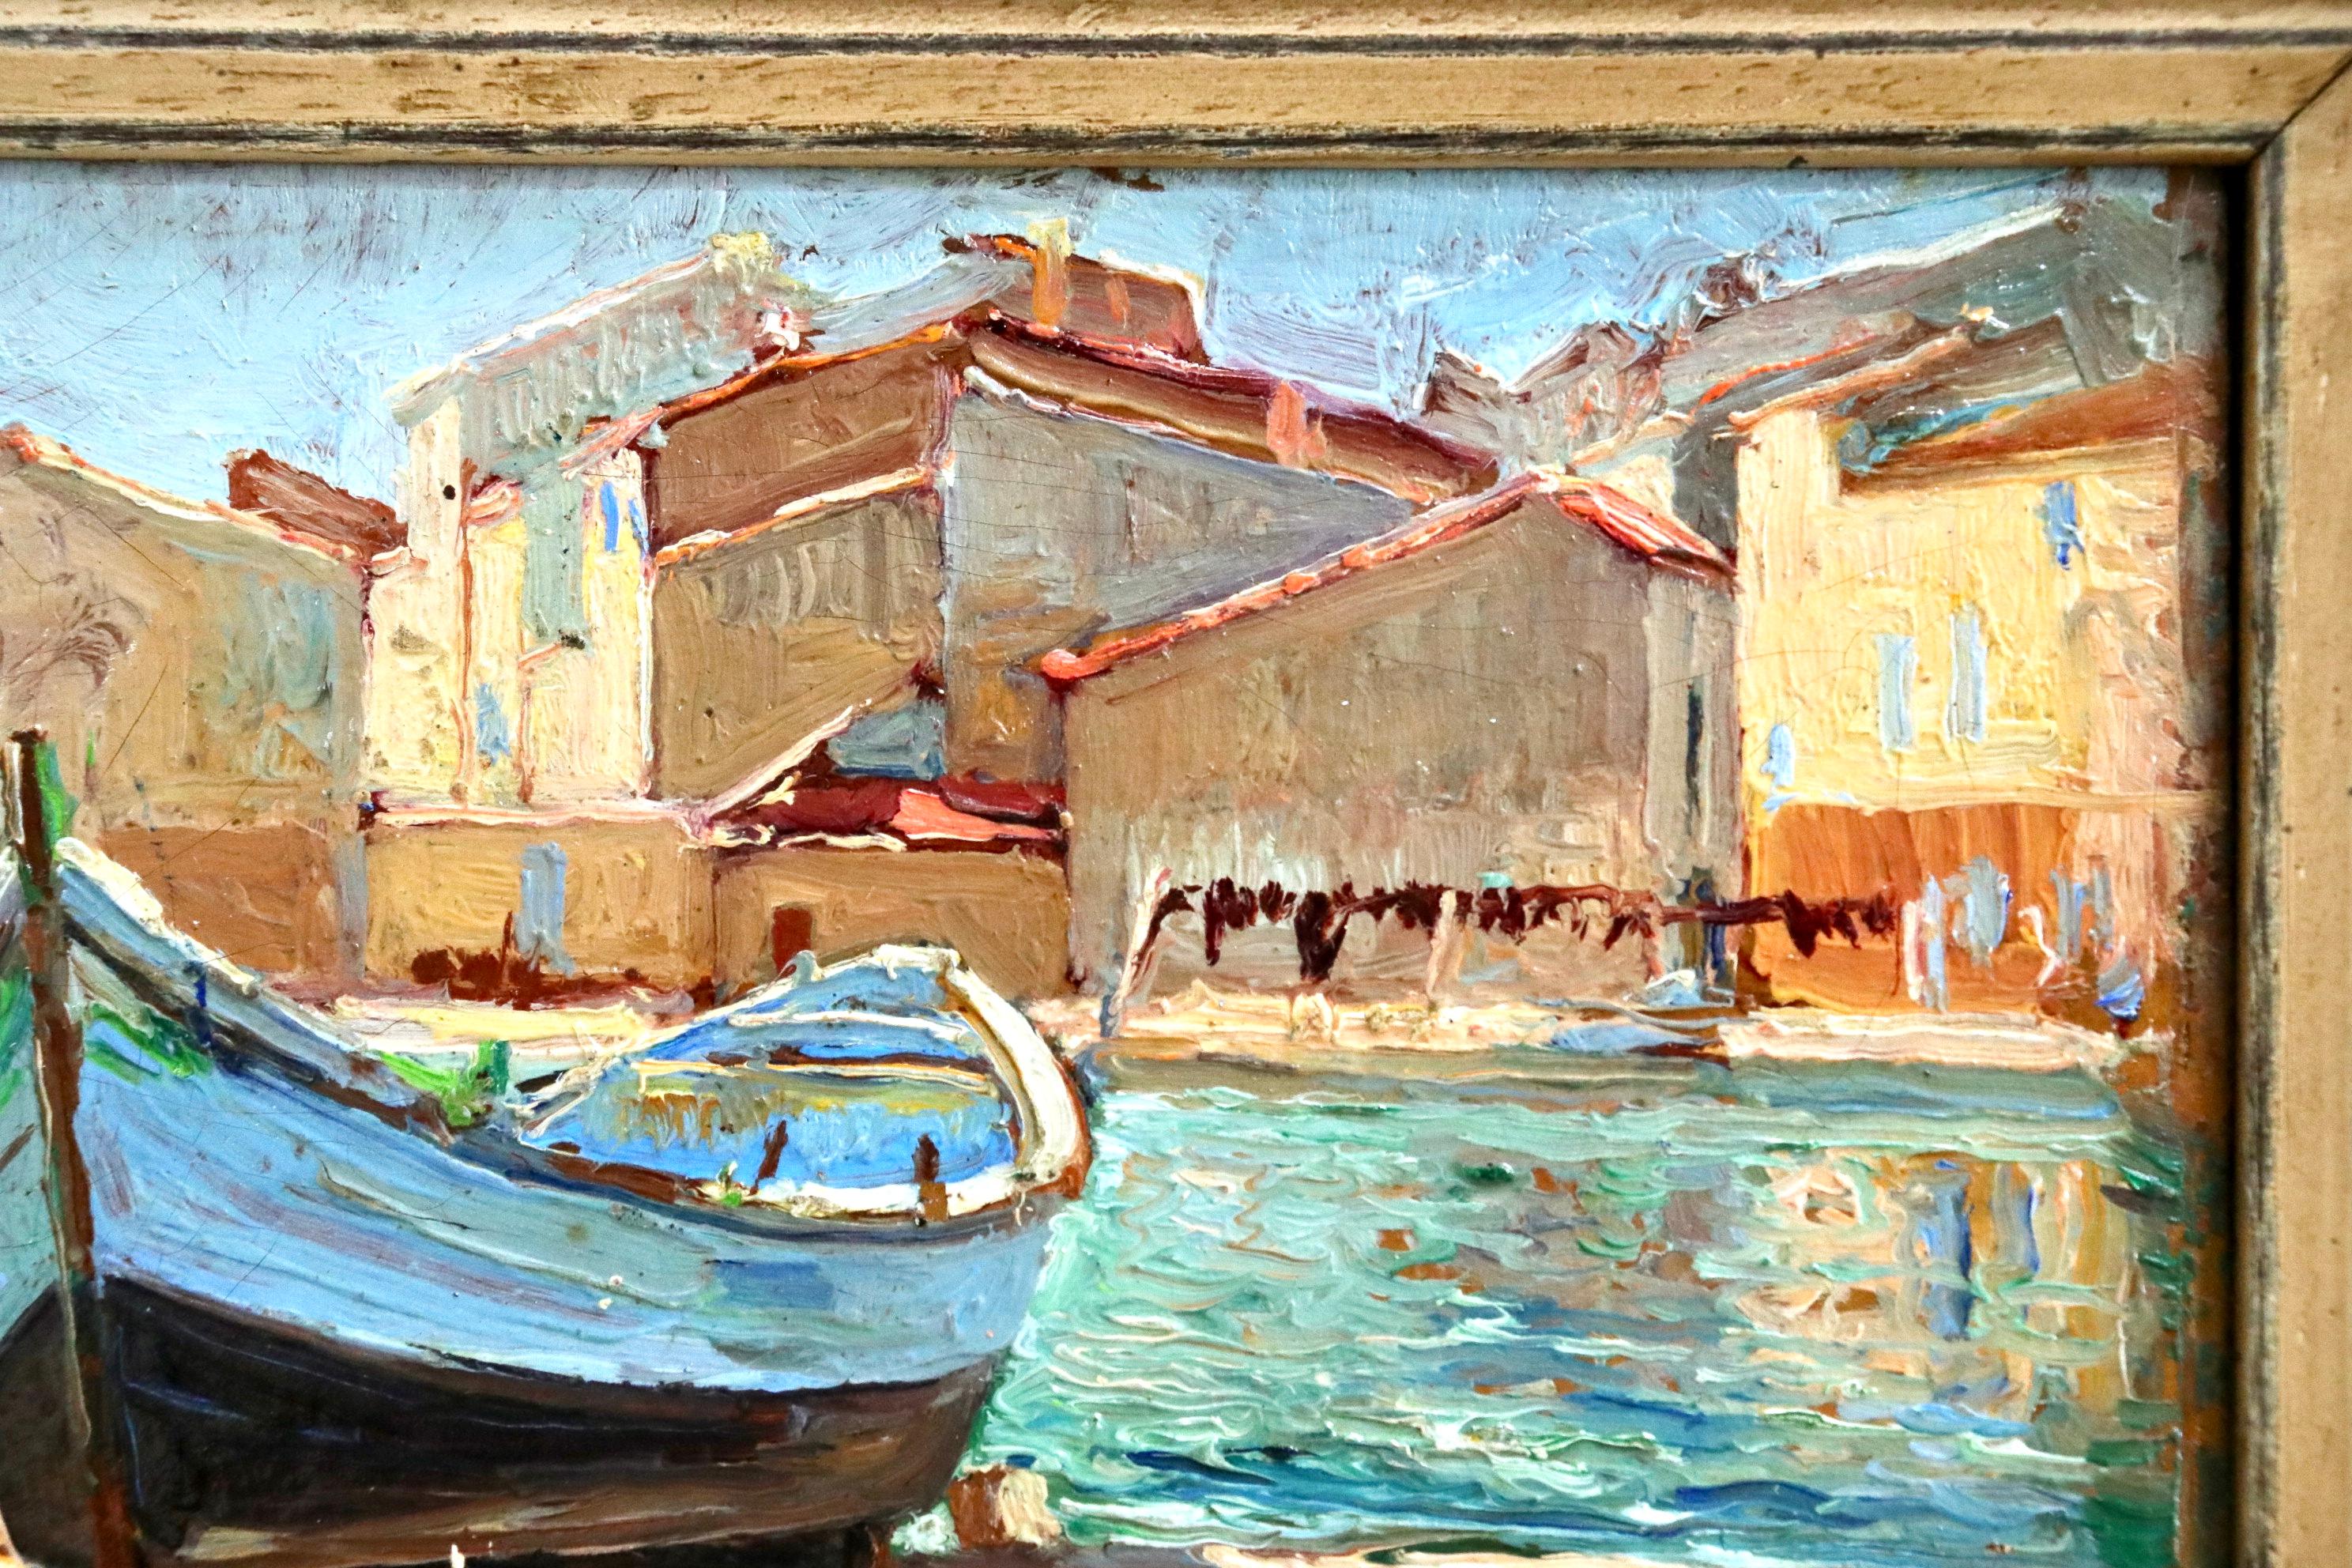 Martigues - 20th Century Oil, Boat by Canal Landscape by Georges Lapchine 1